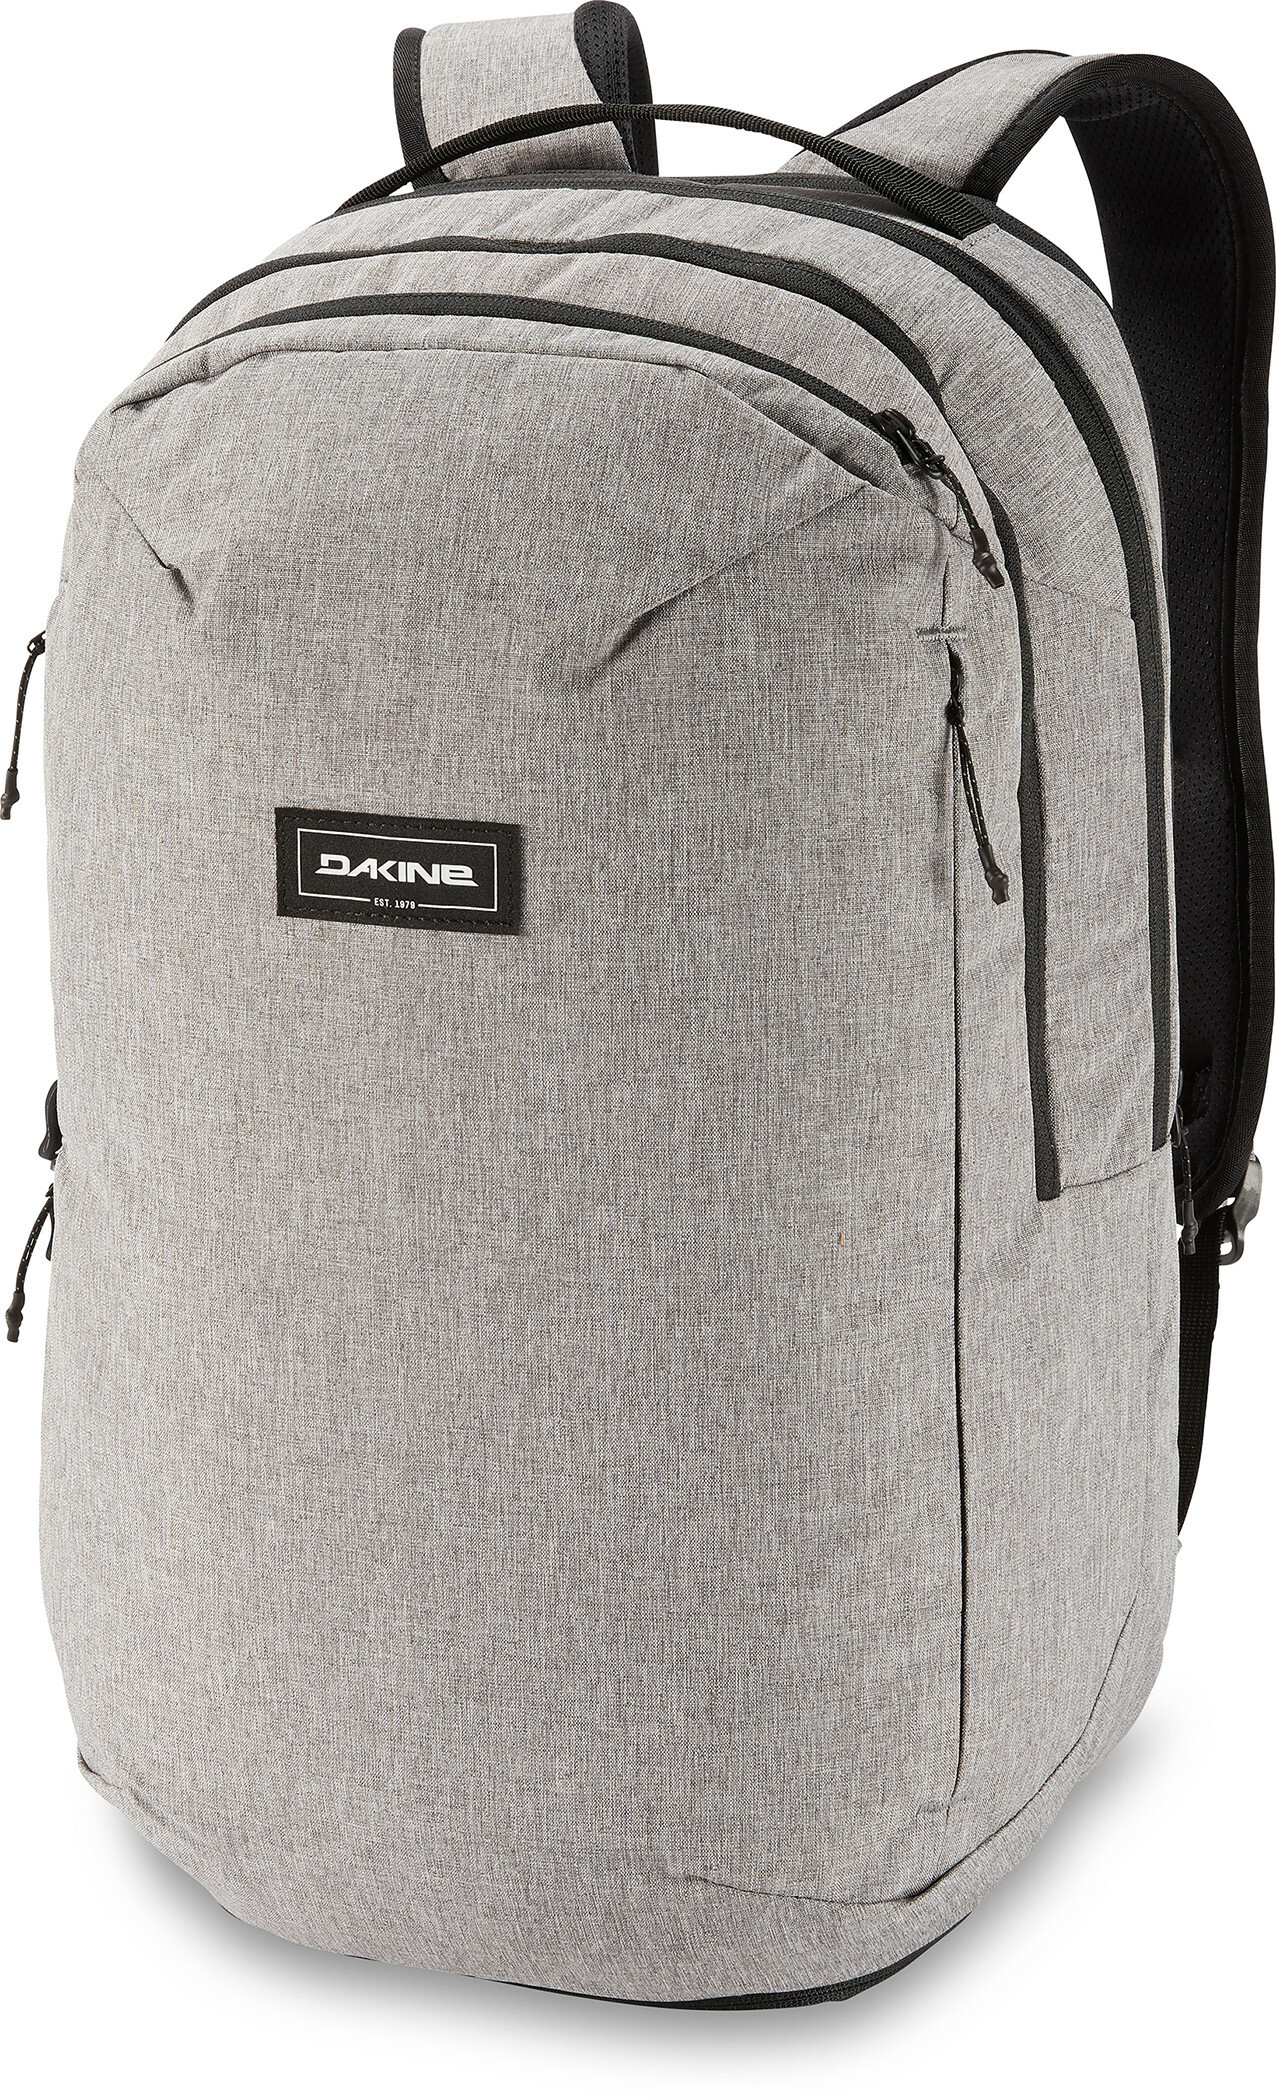 Concourse Pack 31L Backpack